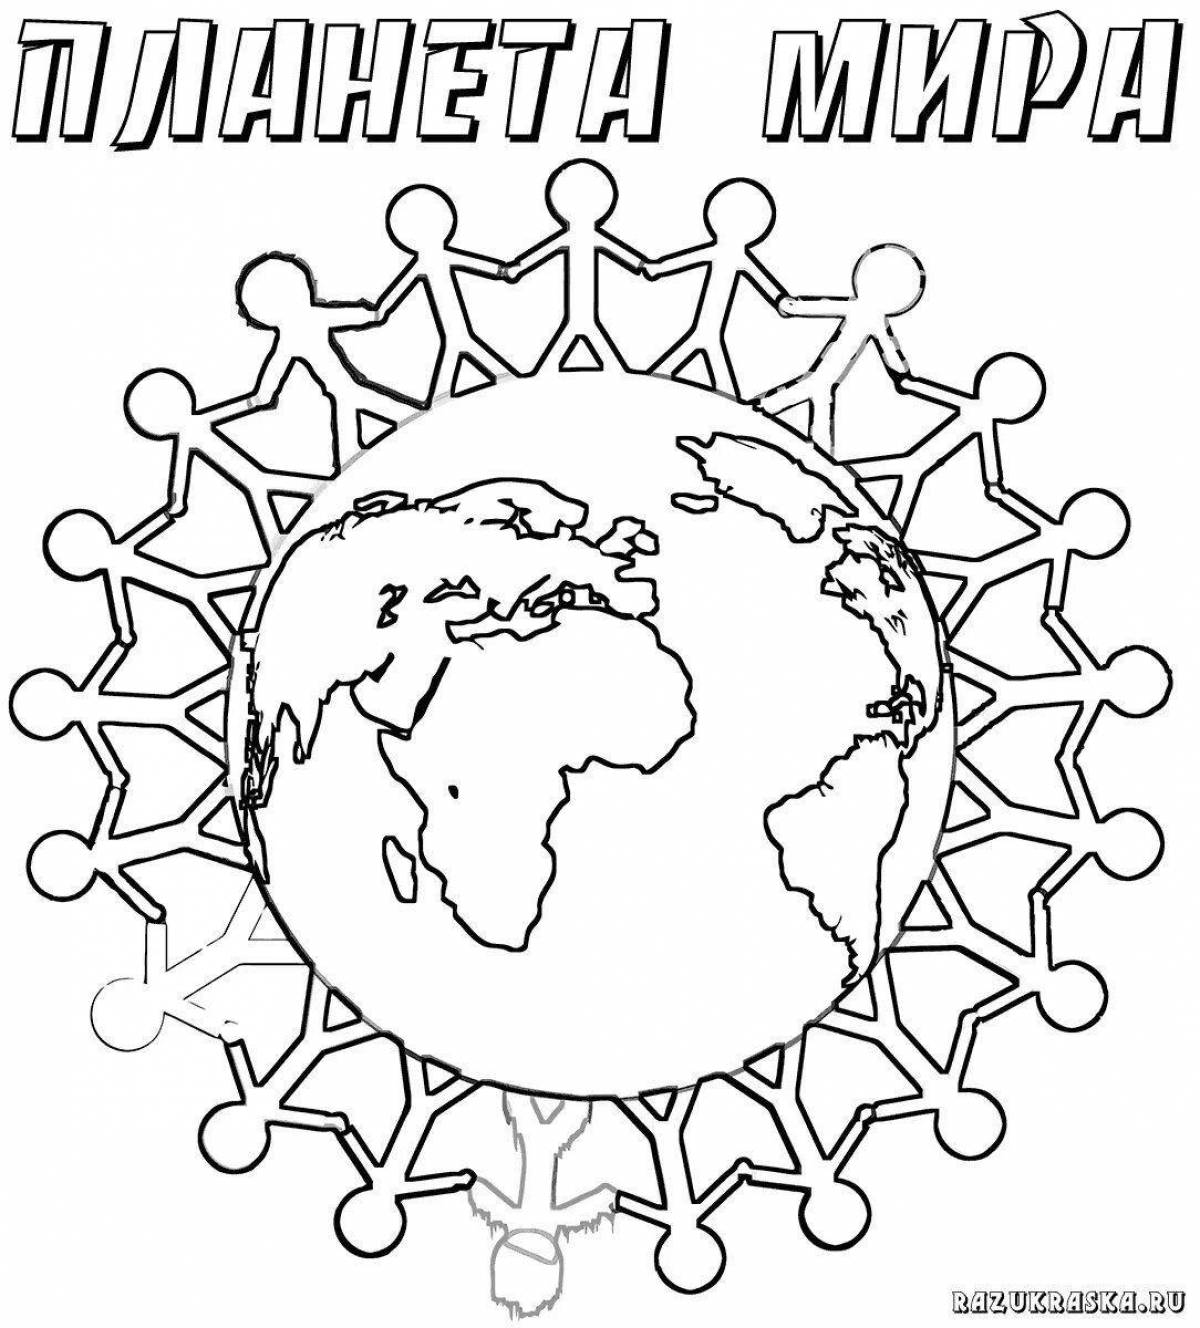 Blessed world peace without war coloring book